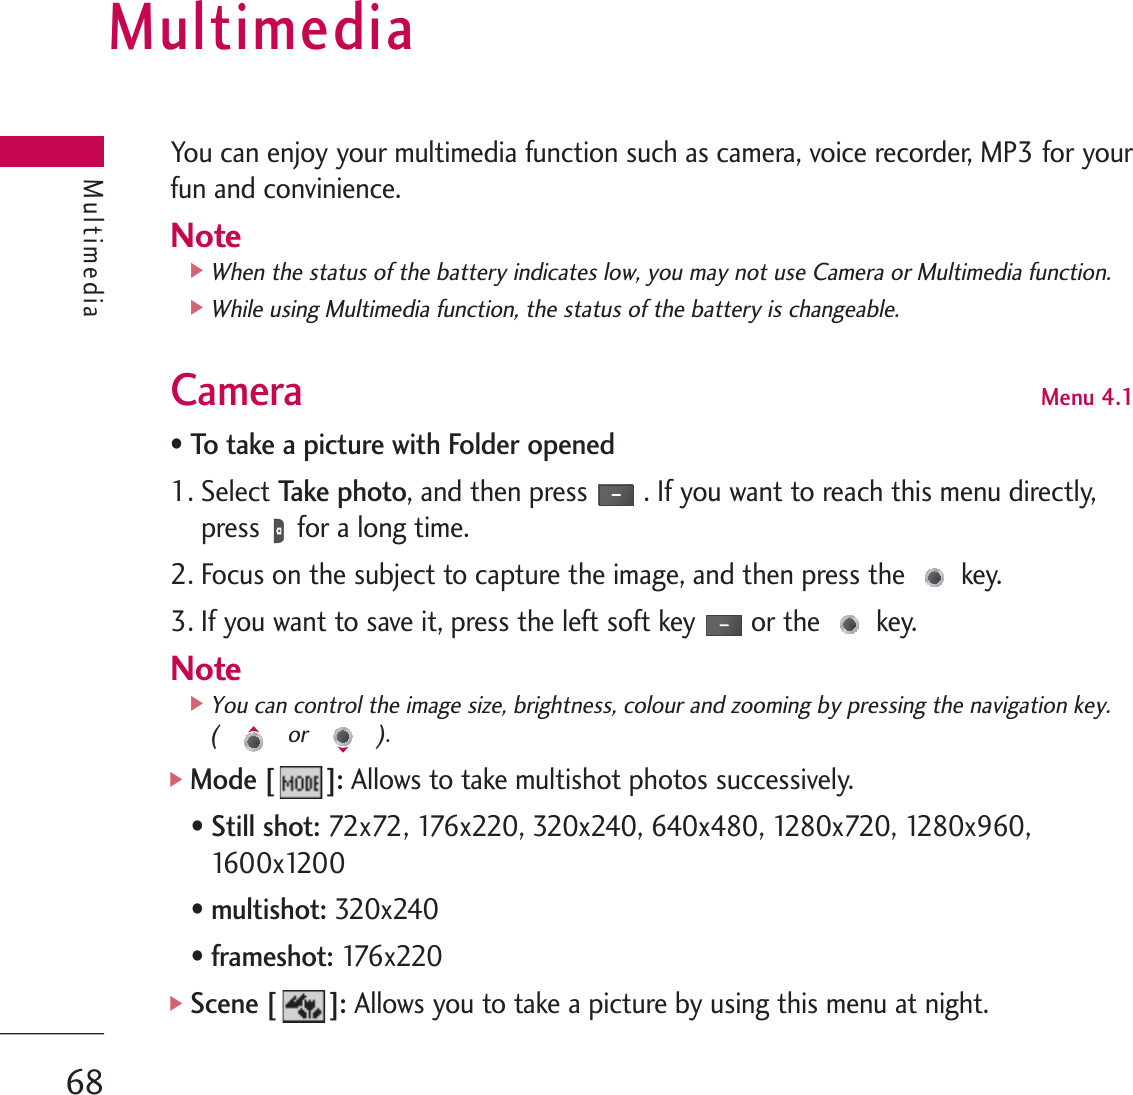 MultimediaYou can enjoy your multimedia function such as camera, voice recorder, MP3 for yourfun and convinience.Note]When the status of the battery indicates low, you may not use Camera or Multimedia function.]While using Multimedia function, the status of the battery is changeable.Camera Menu 4.1• To take a picture with Folder opened1. Select Ta ke  p h o to, and then press . If you want to reach this menu directly,press for a long time.2. Focus on the subject to capture the image, and then press the key.3. If you want to save it, press the left soft key or the key.Note]You can control the image size, brightness, colour and zooming by pressing the navigation key. ( or ).]Mode [ ]: Allows to take multishot photos successively. • Still shot:72x72, 176x220, 320x240, 640x480, 1280x720, 1280x960,1600x1200  • multishot: 320x240• frameshot: 176x220 ]Scene [ ]:Allows you to take a picture by using this menu at night.Multimedia68